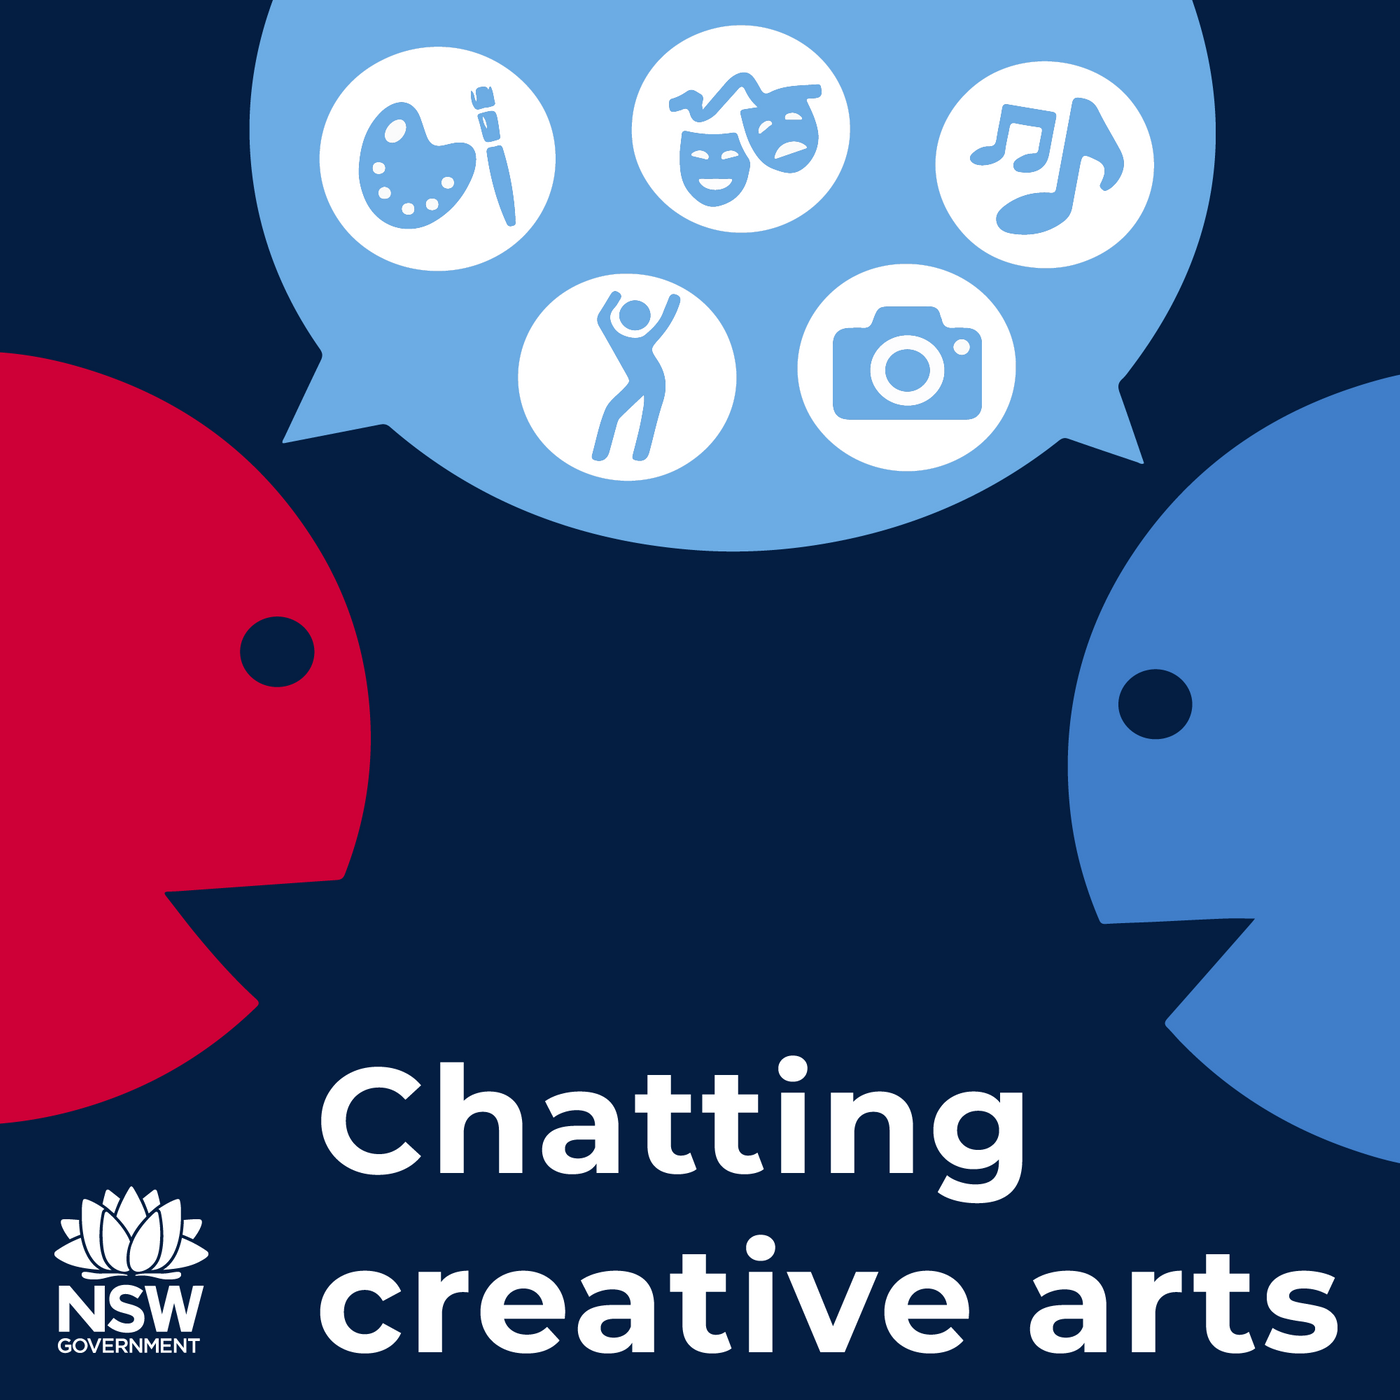 Show artwork for Chatting creative arts